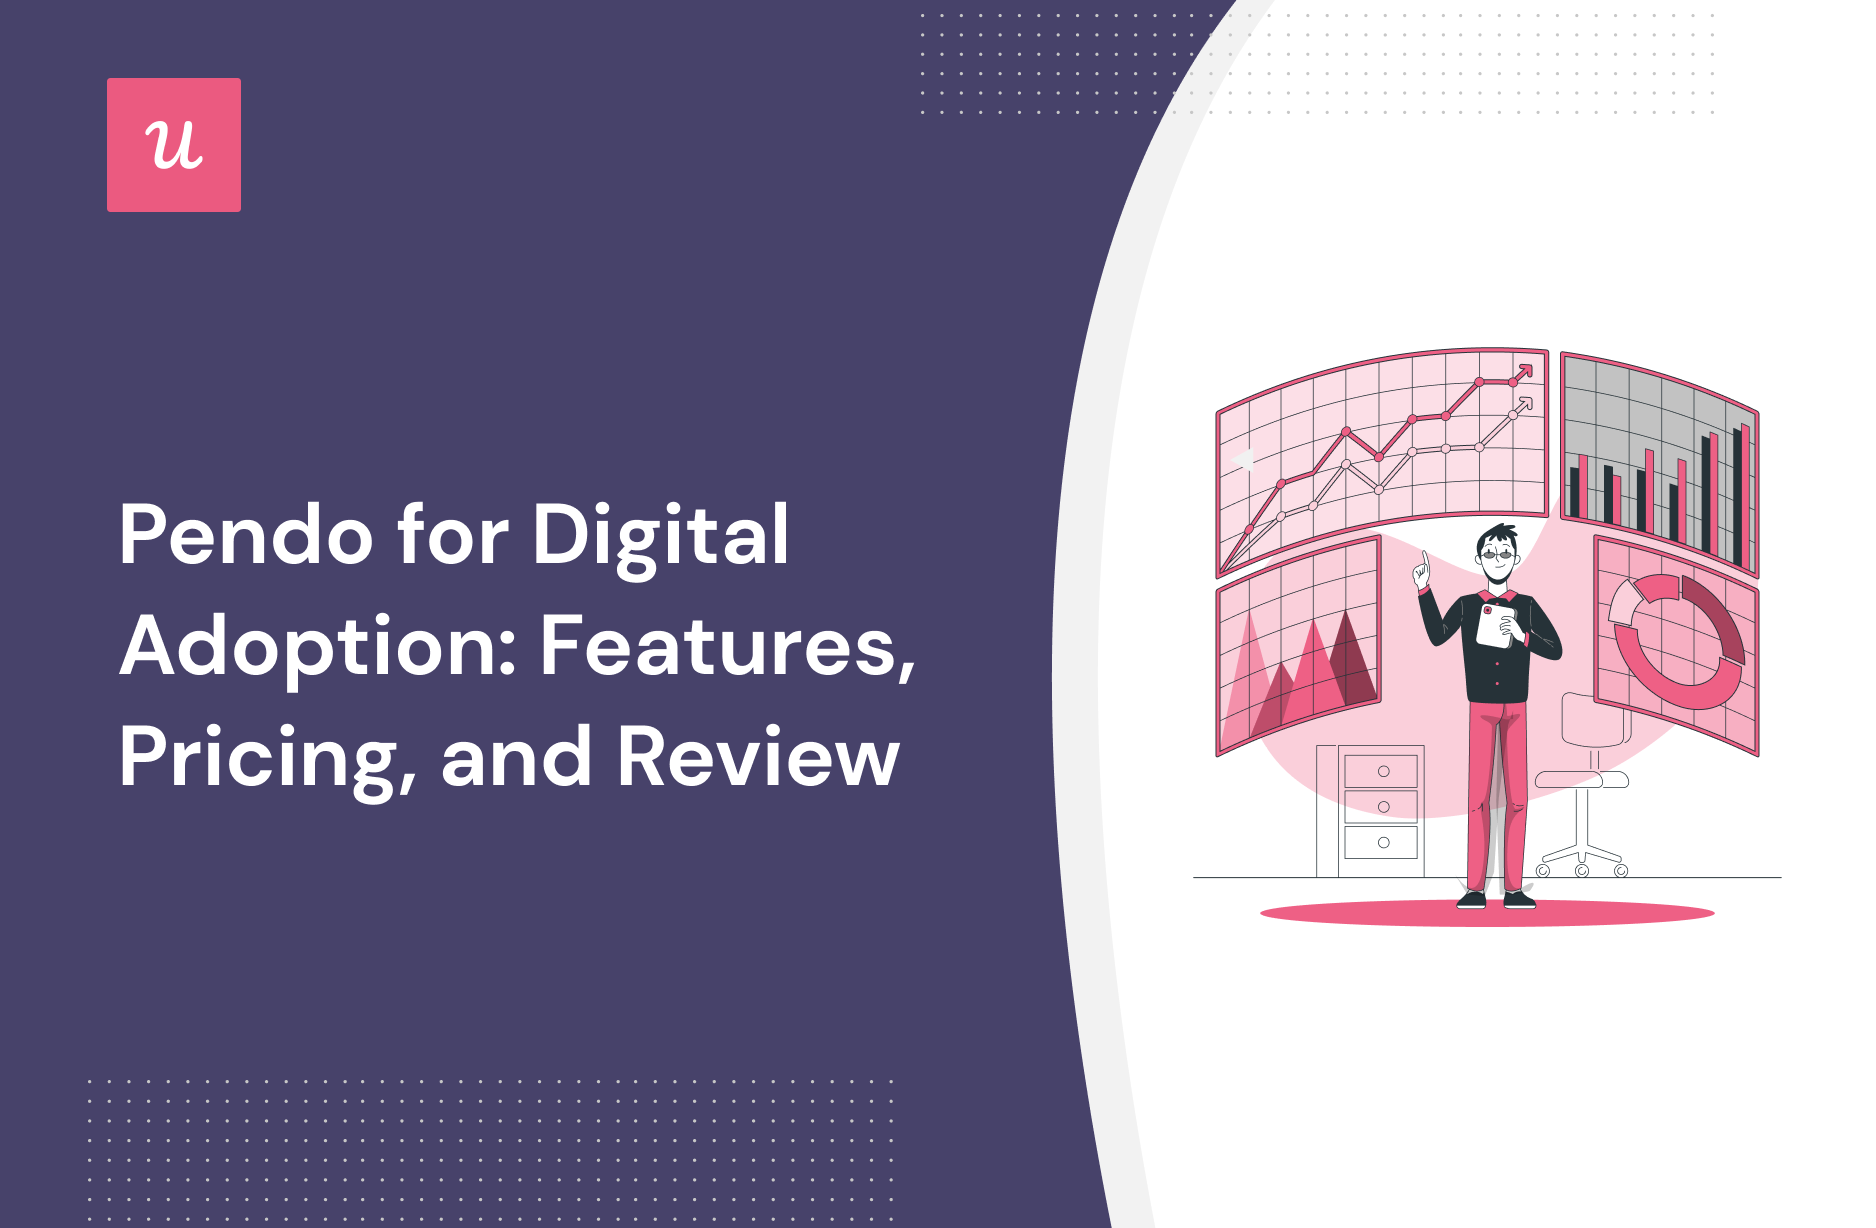 Pendo for Digital adoption: Features, Pricing, and Review